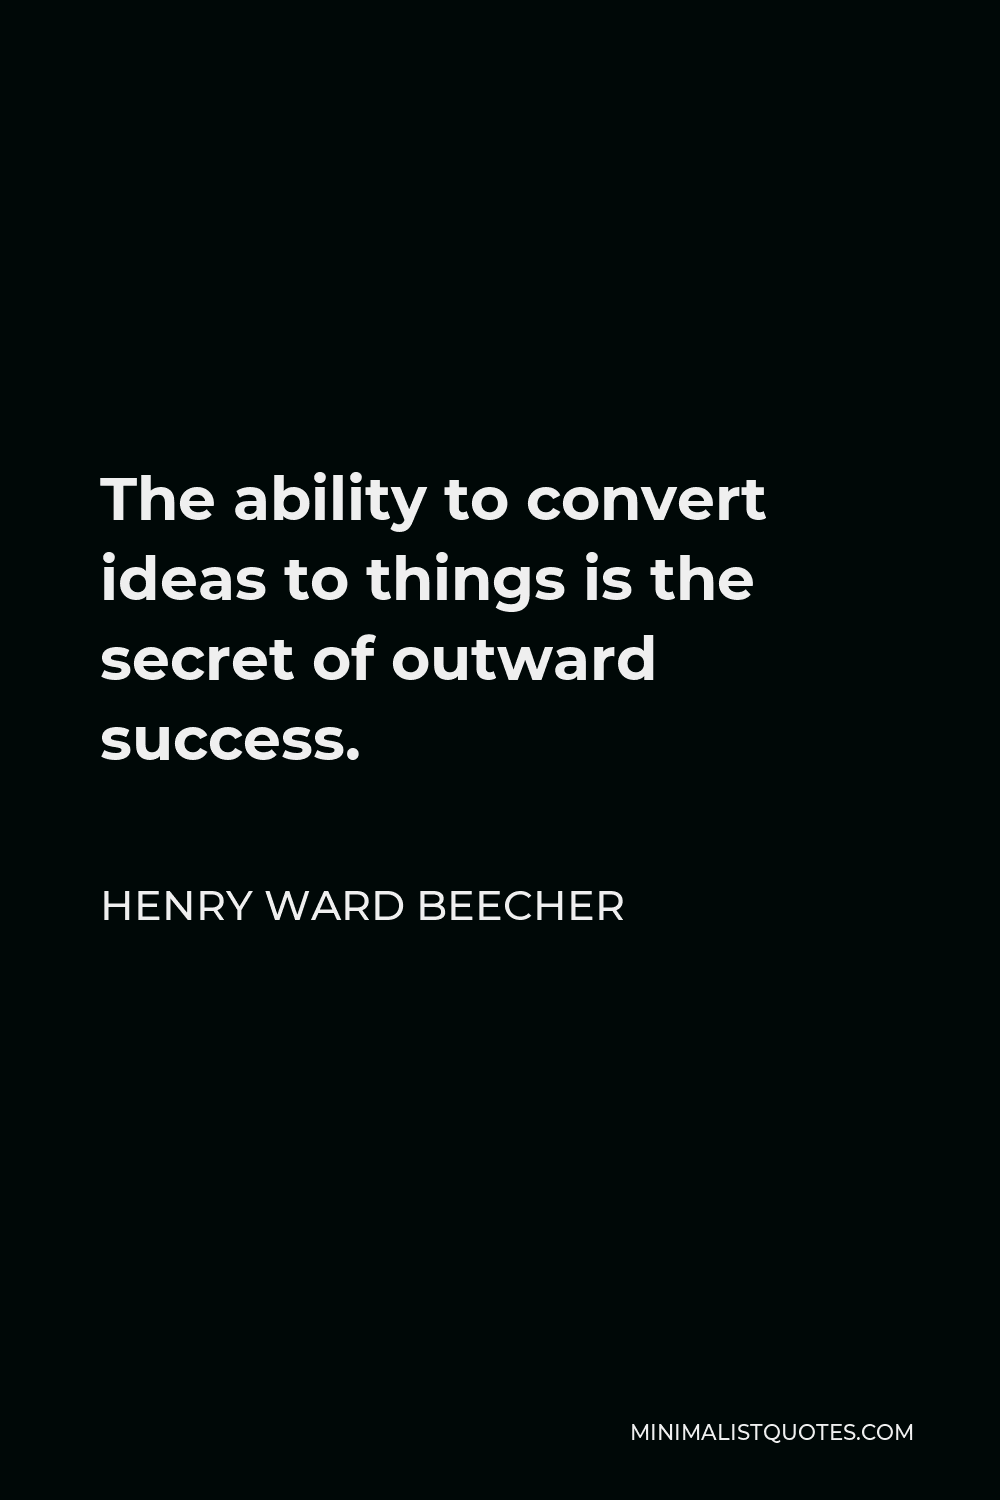 Henry Ward Beecher Quote - The ability to convert ideas to things is the secret of outward success.